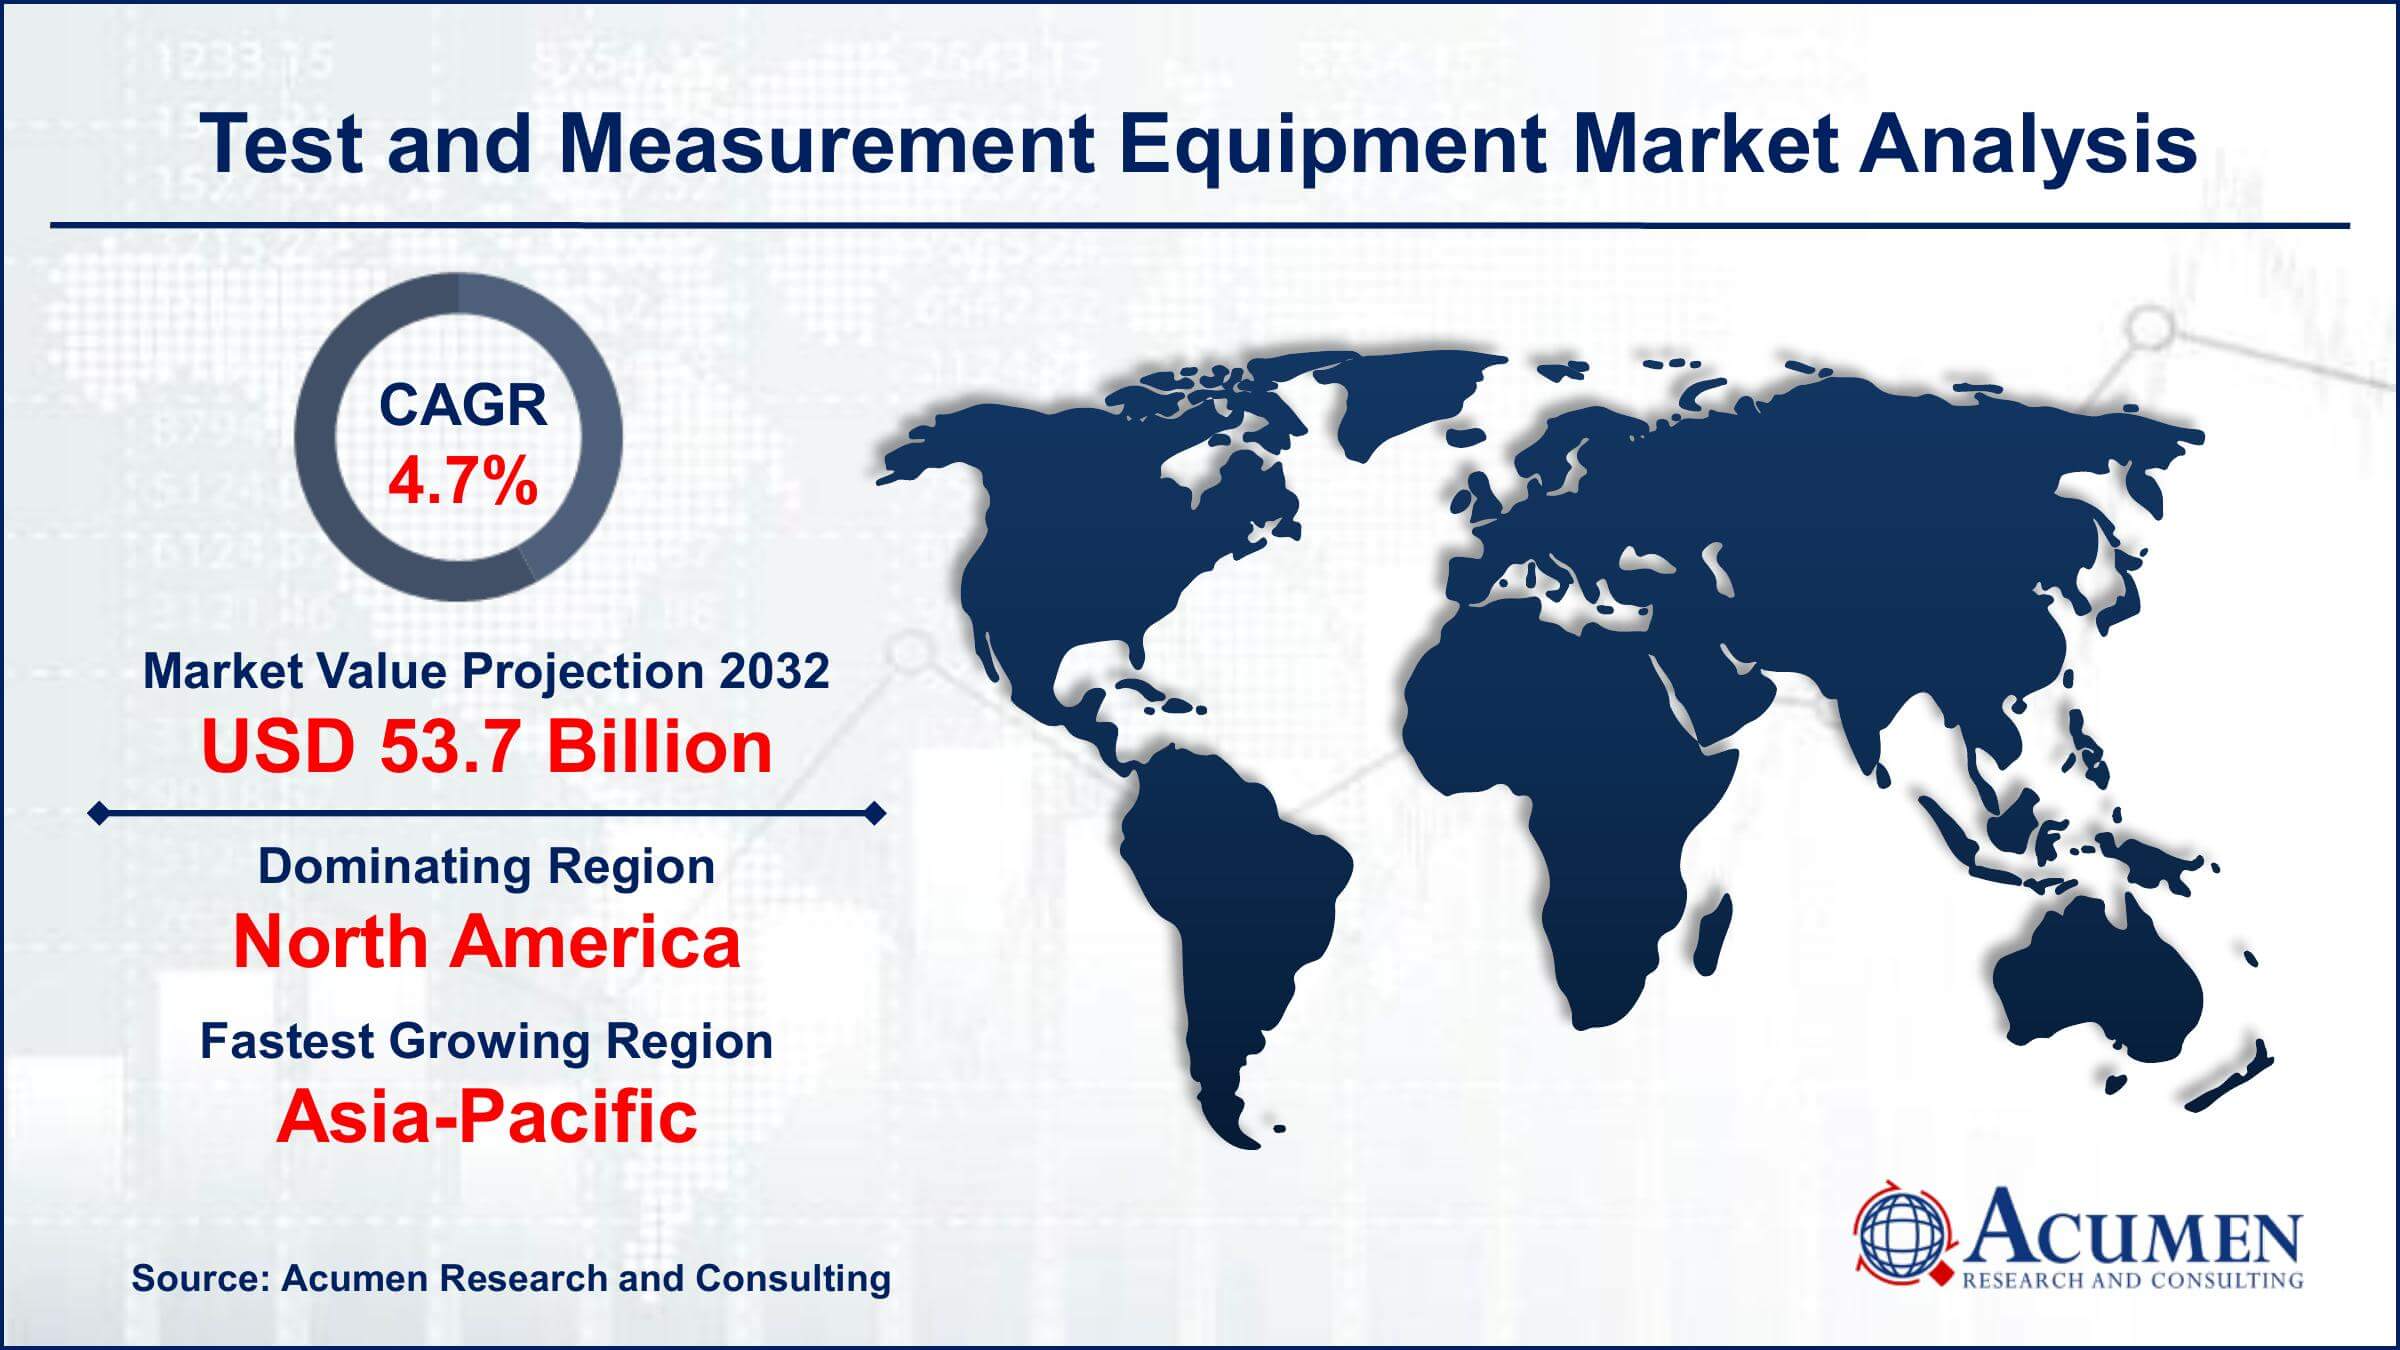 Global Test and Measurement Equipment Market Trends